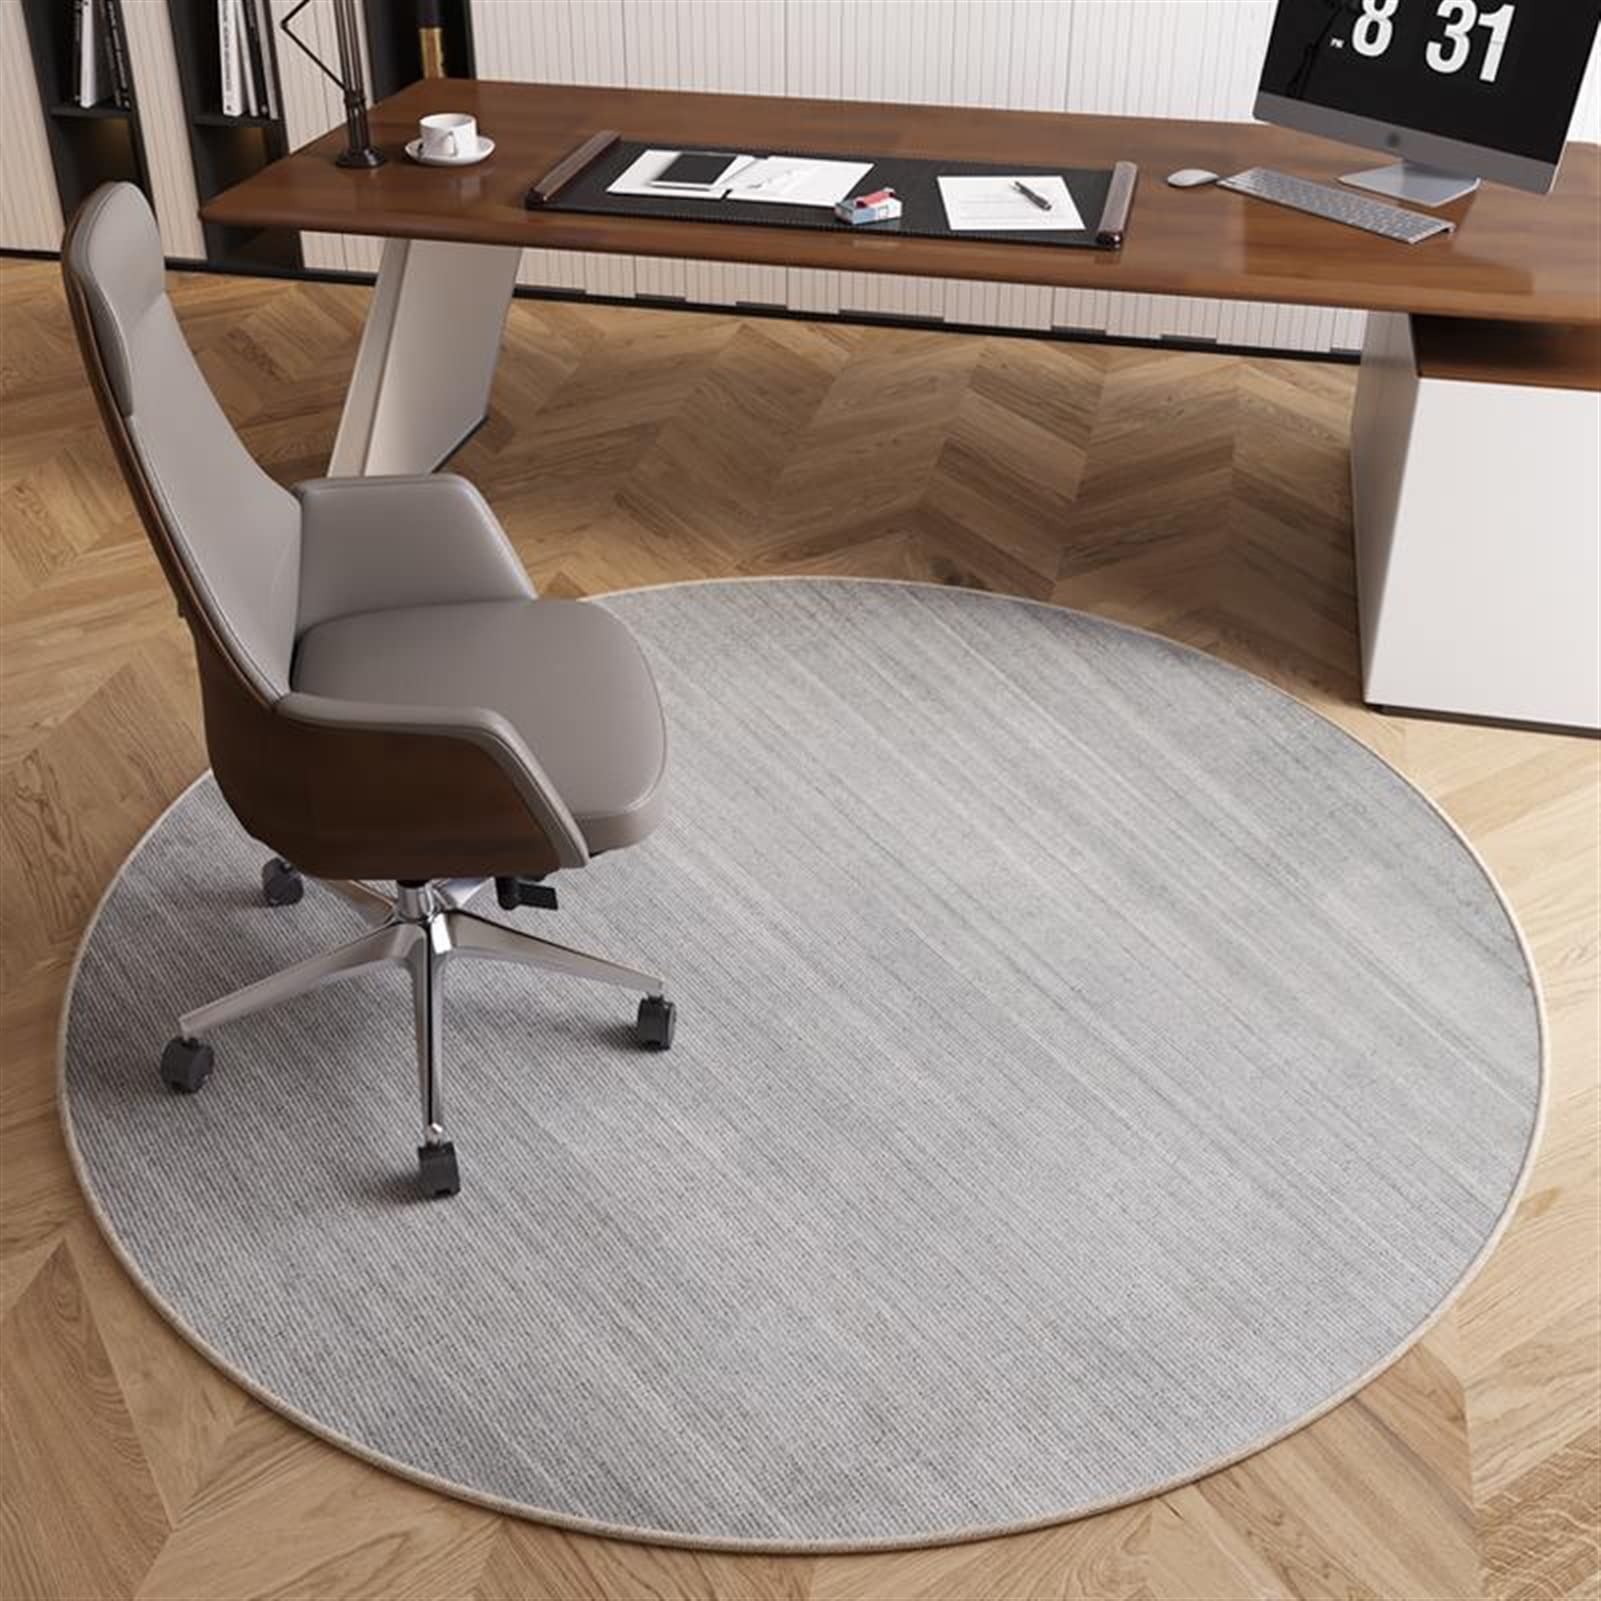 Heavyoff Office Chair Mat for Hardwood Floor Computer Gaming Rolling Chair Mat Floor Protector Mat Round Desk Rug Wood Tile Protection Mat for Office Home, A10, Diameter 24"